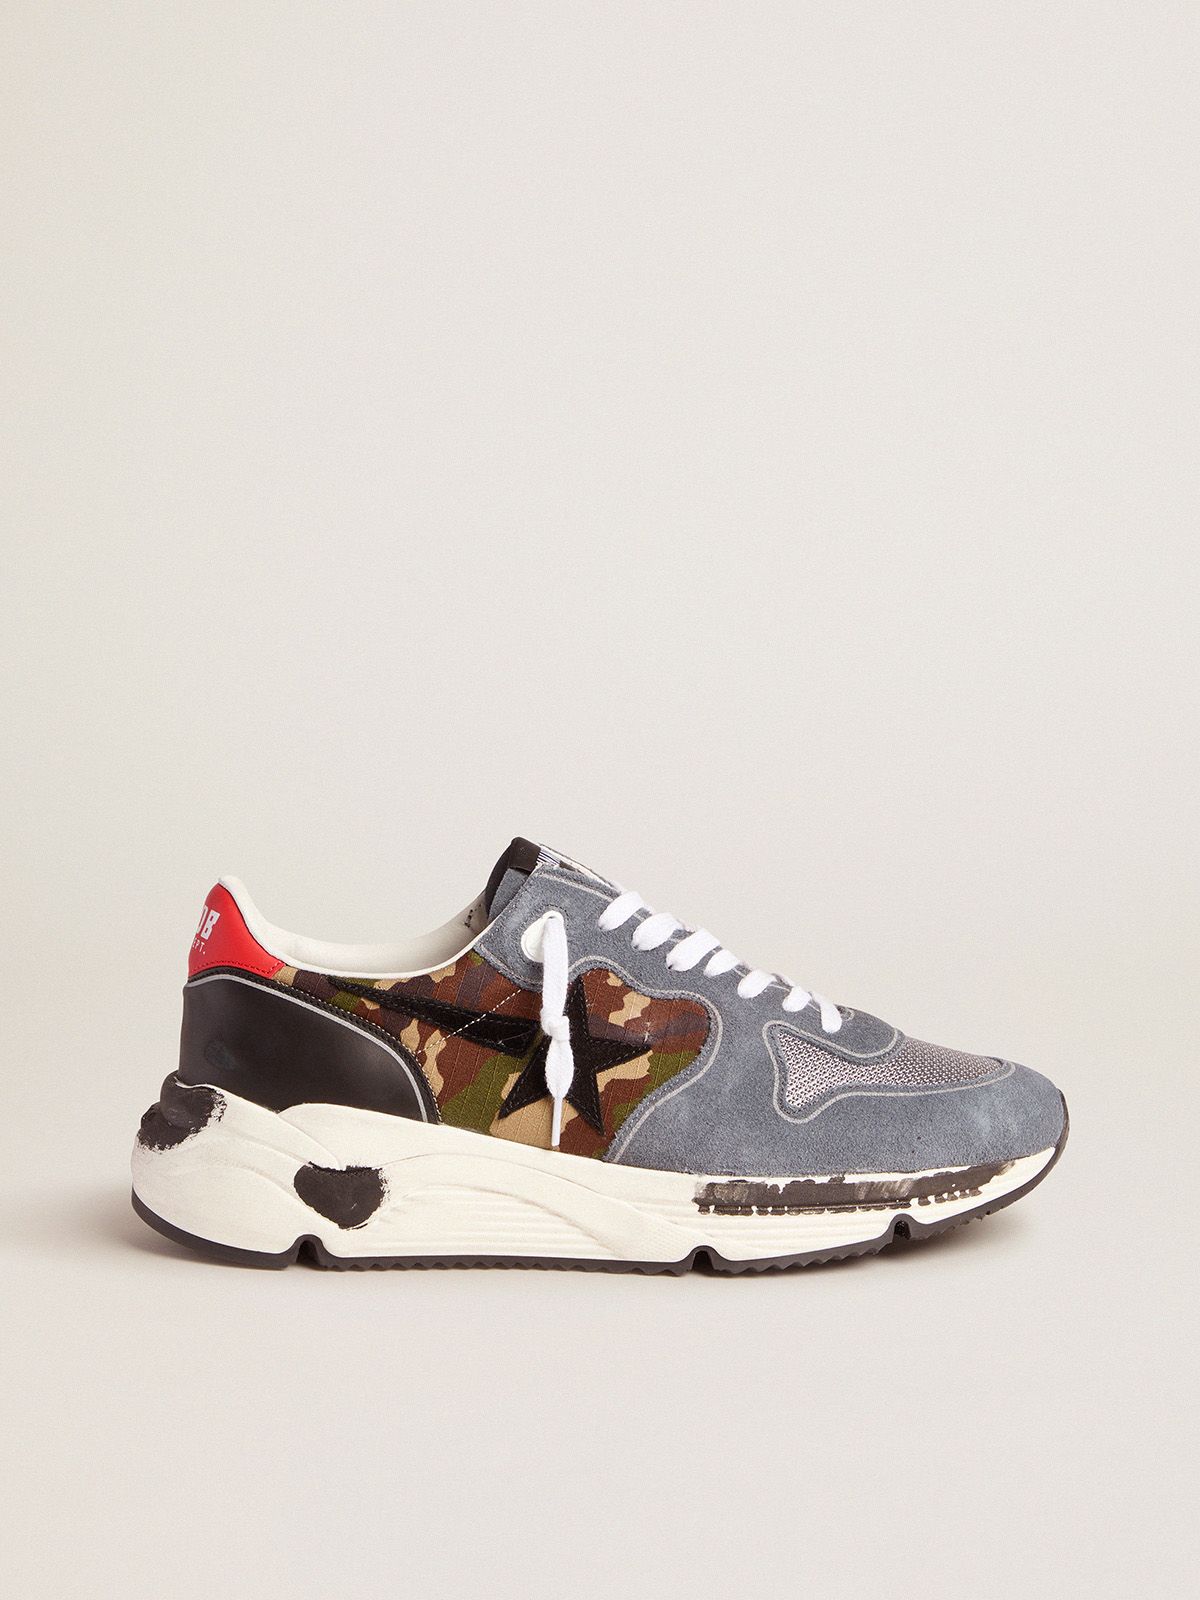 golden goose textured heel insert nylon sneakers Sole red Camouflage Running and tab with